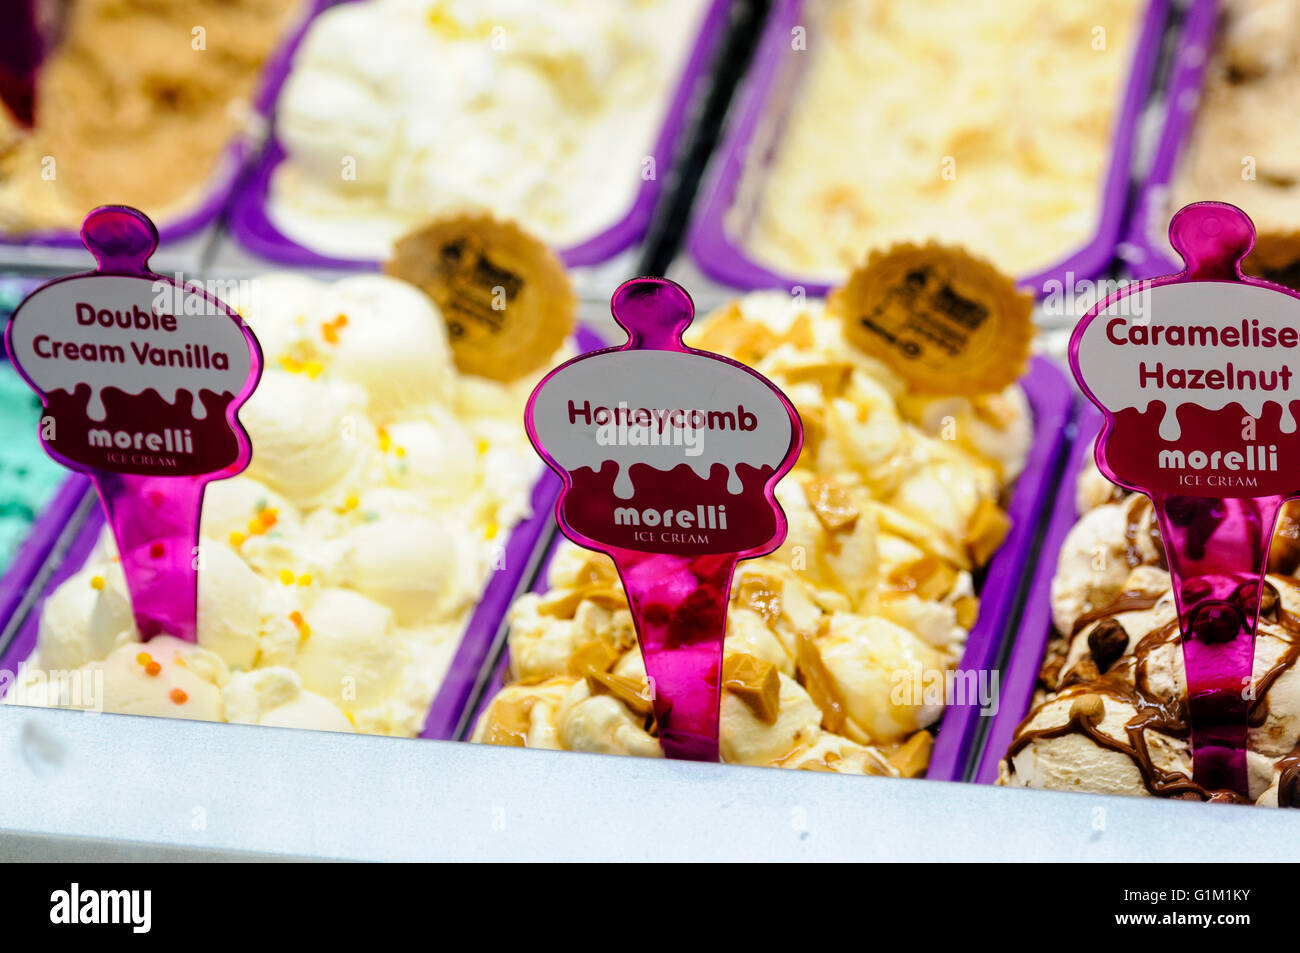 Tubs of ice-cream from the famous Morelli store in Northern Ireland. Stock Photo